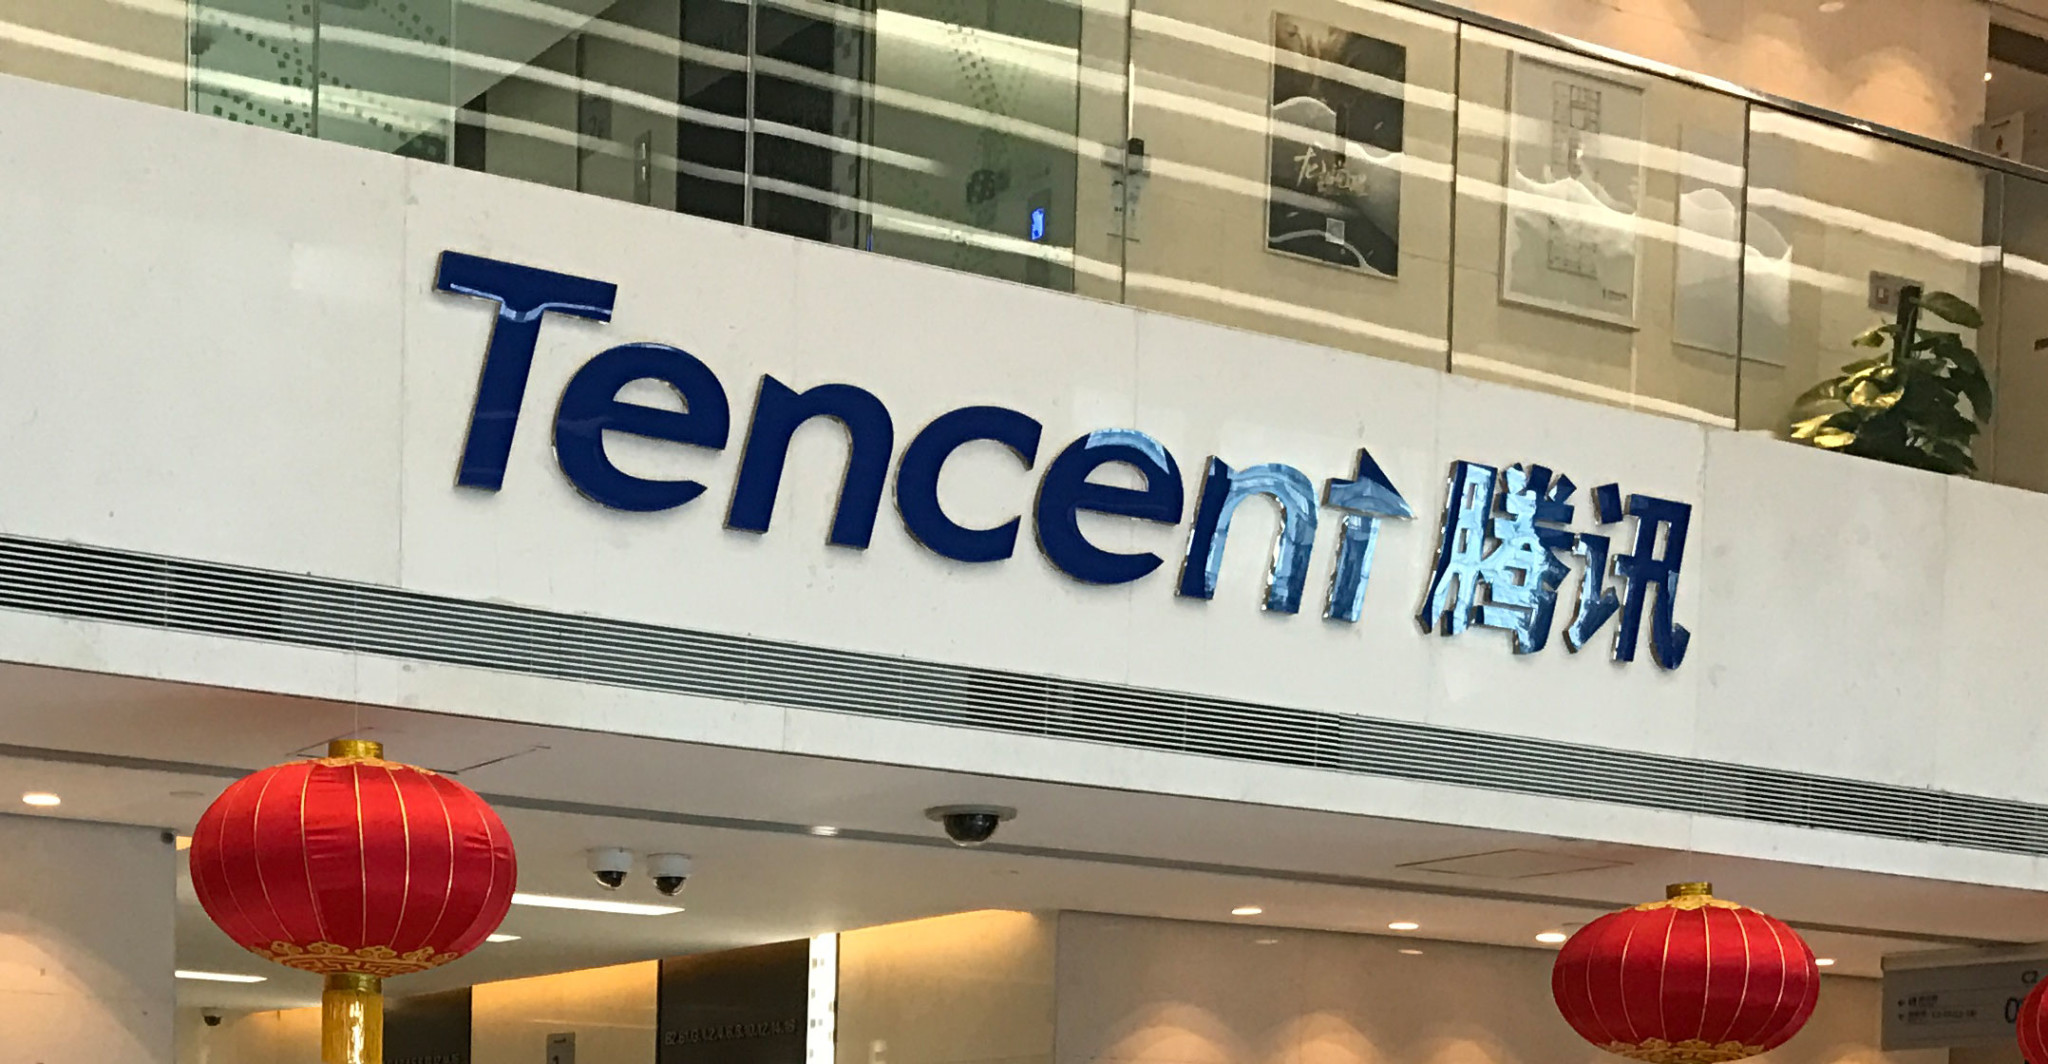 Content Delivery Network | Tencent Cloud